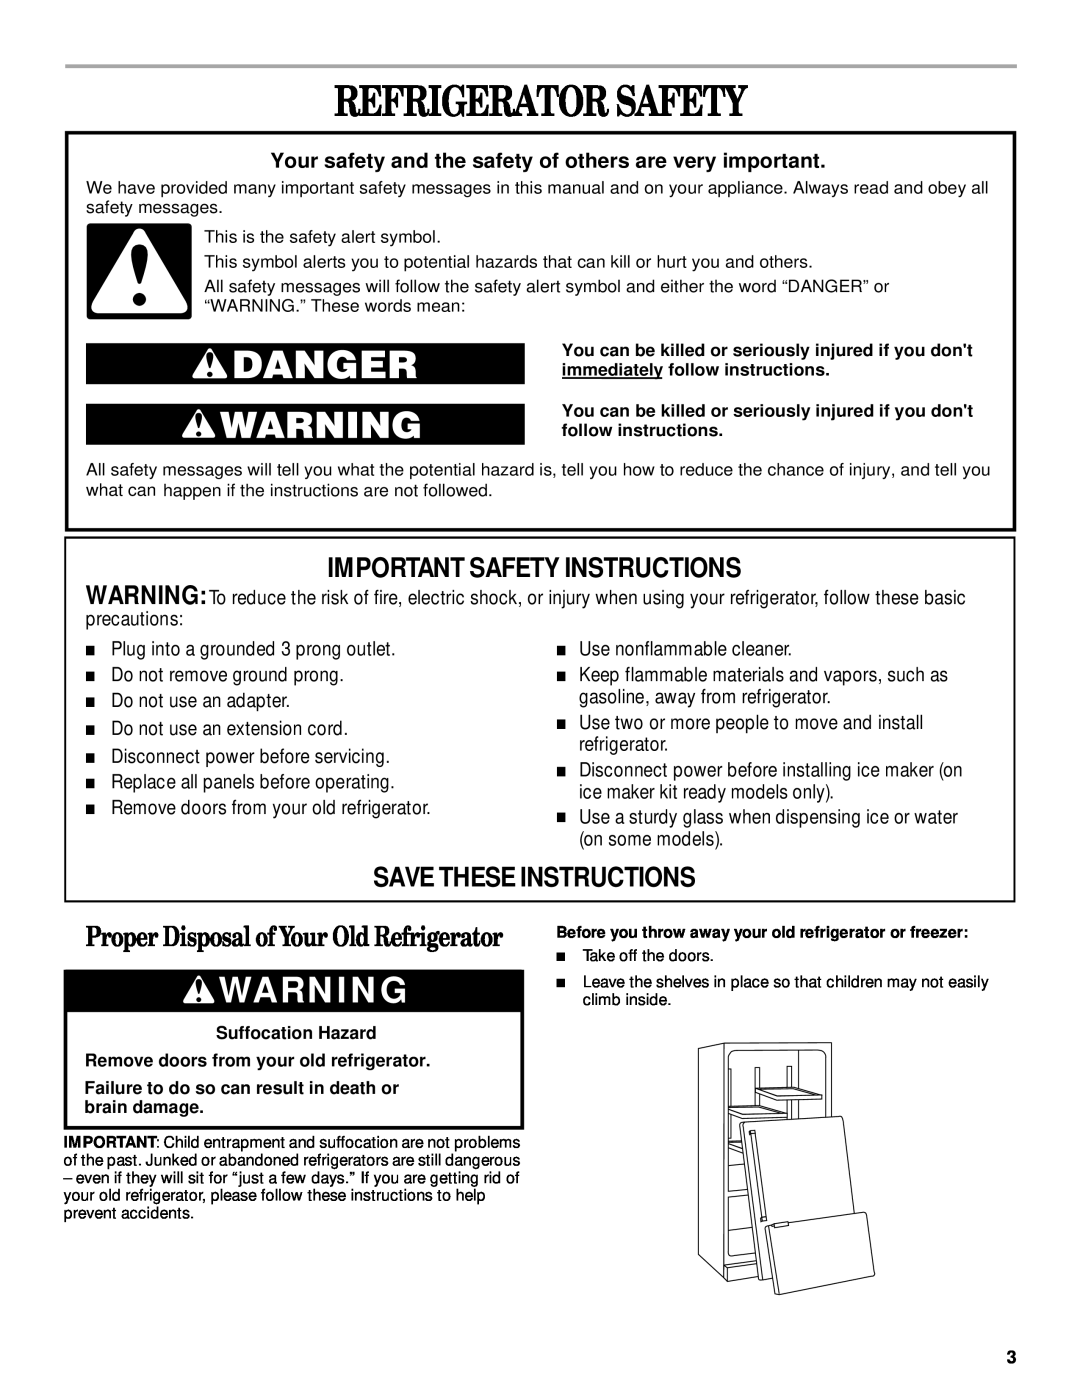 Whirlpool 2300253 manual Refrigerator Safety, Proper Disposal of Your Old Refrigerator, Important Safety Instructions 